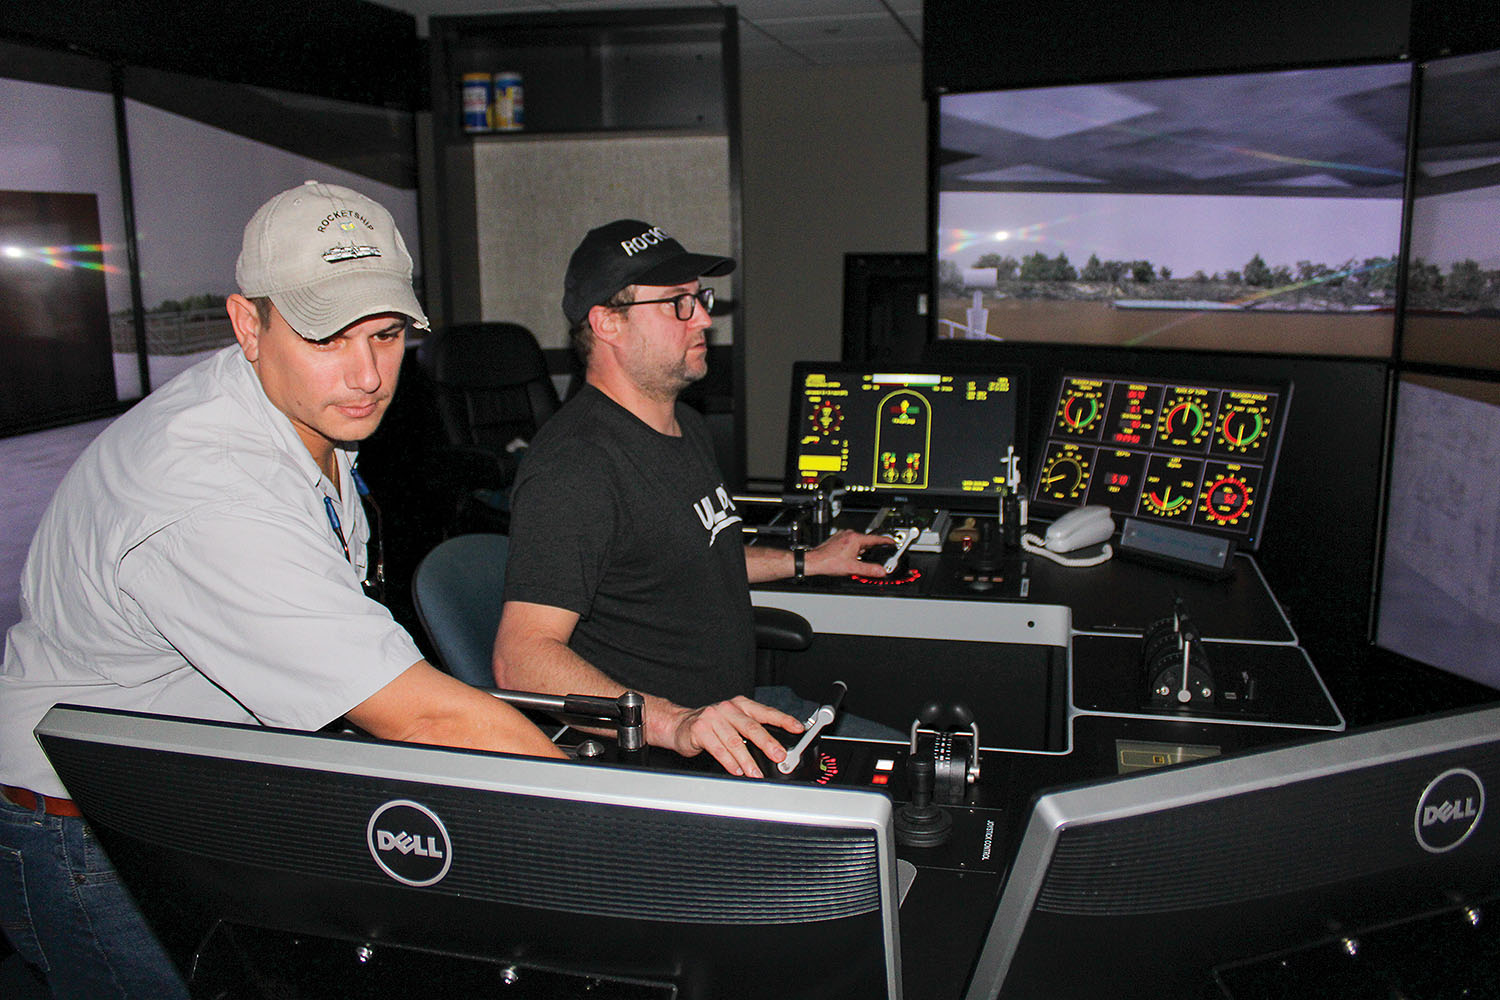 Capt. Tom Sullivan (left) and third mate Mike Cooper complete a simulation in which Cooper piloted the R/S RocketShip down the Lower Mississippi River near Baton Rouge, La. (Photo by Shelley Byrne)